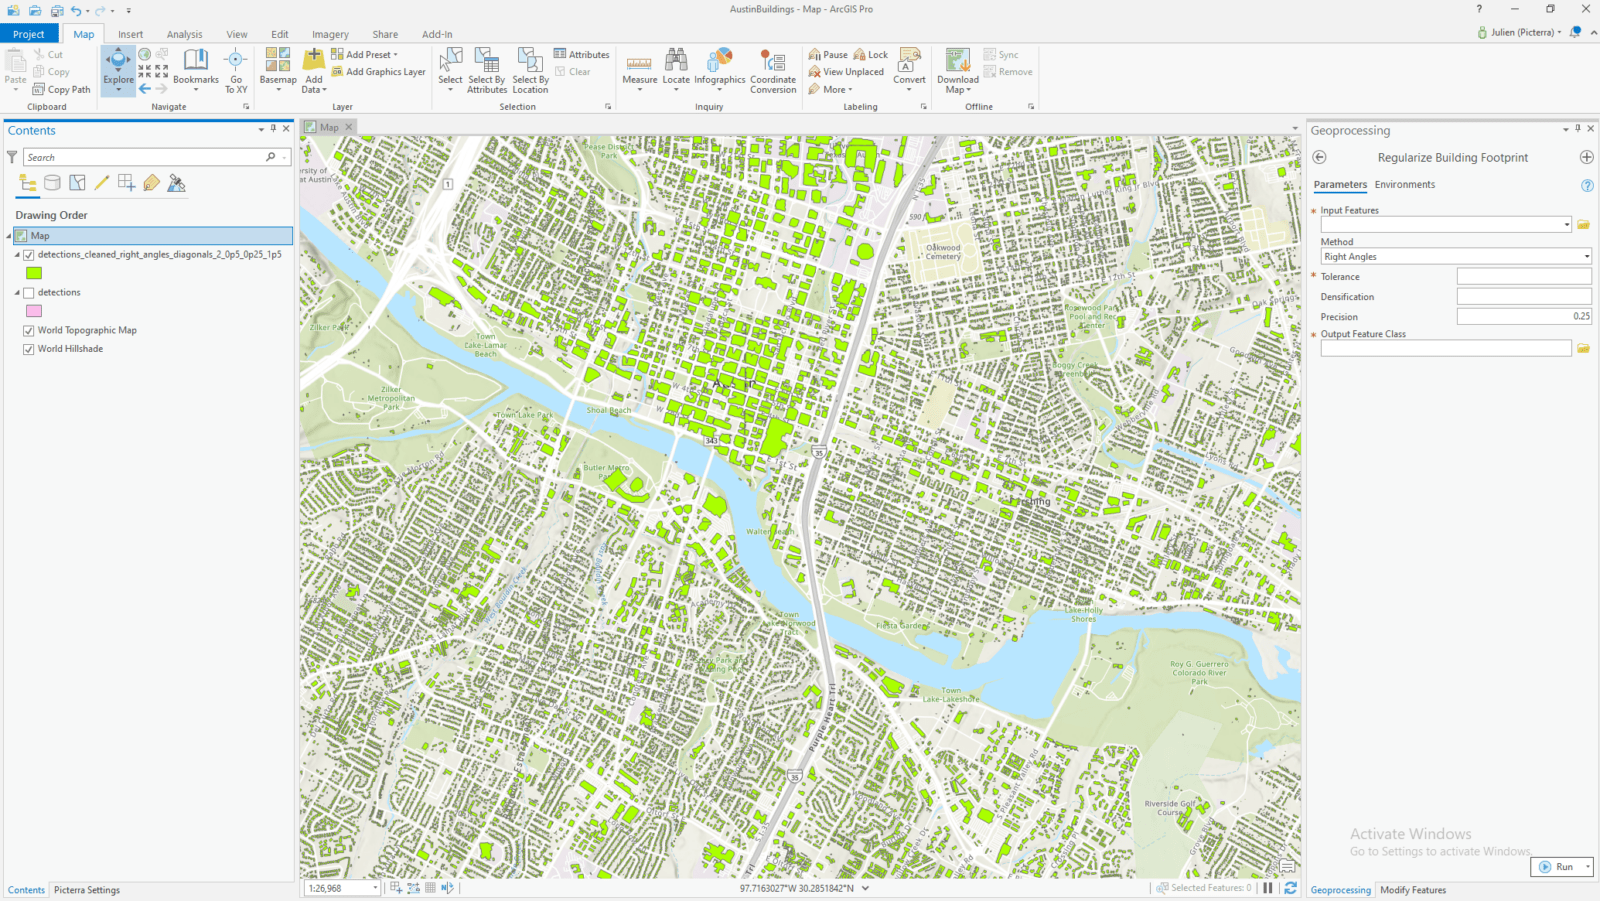 Detections in ArcGIS Pro